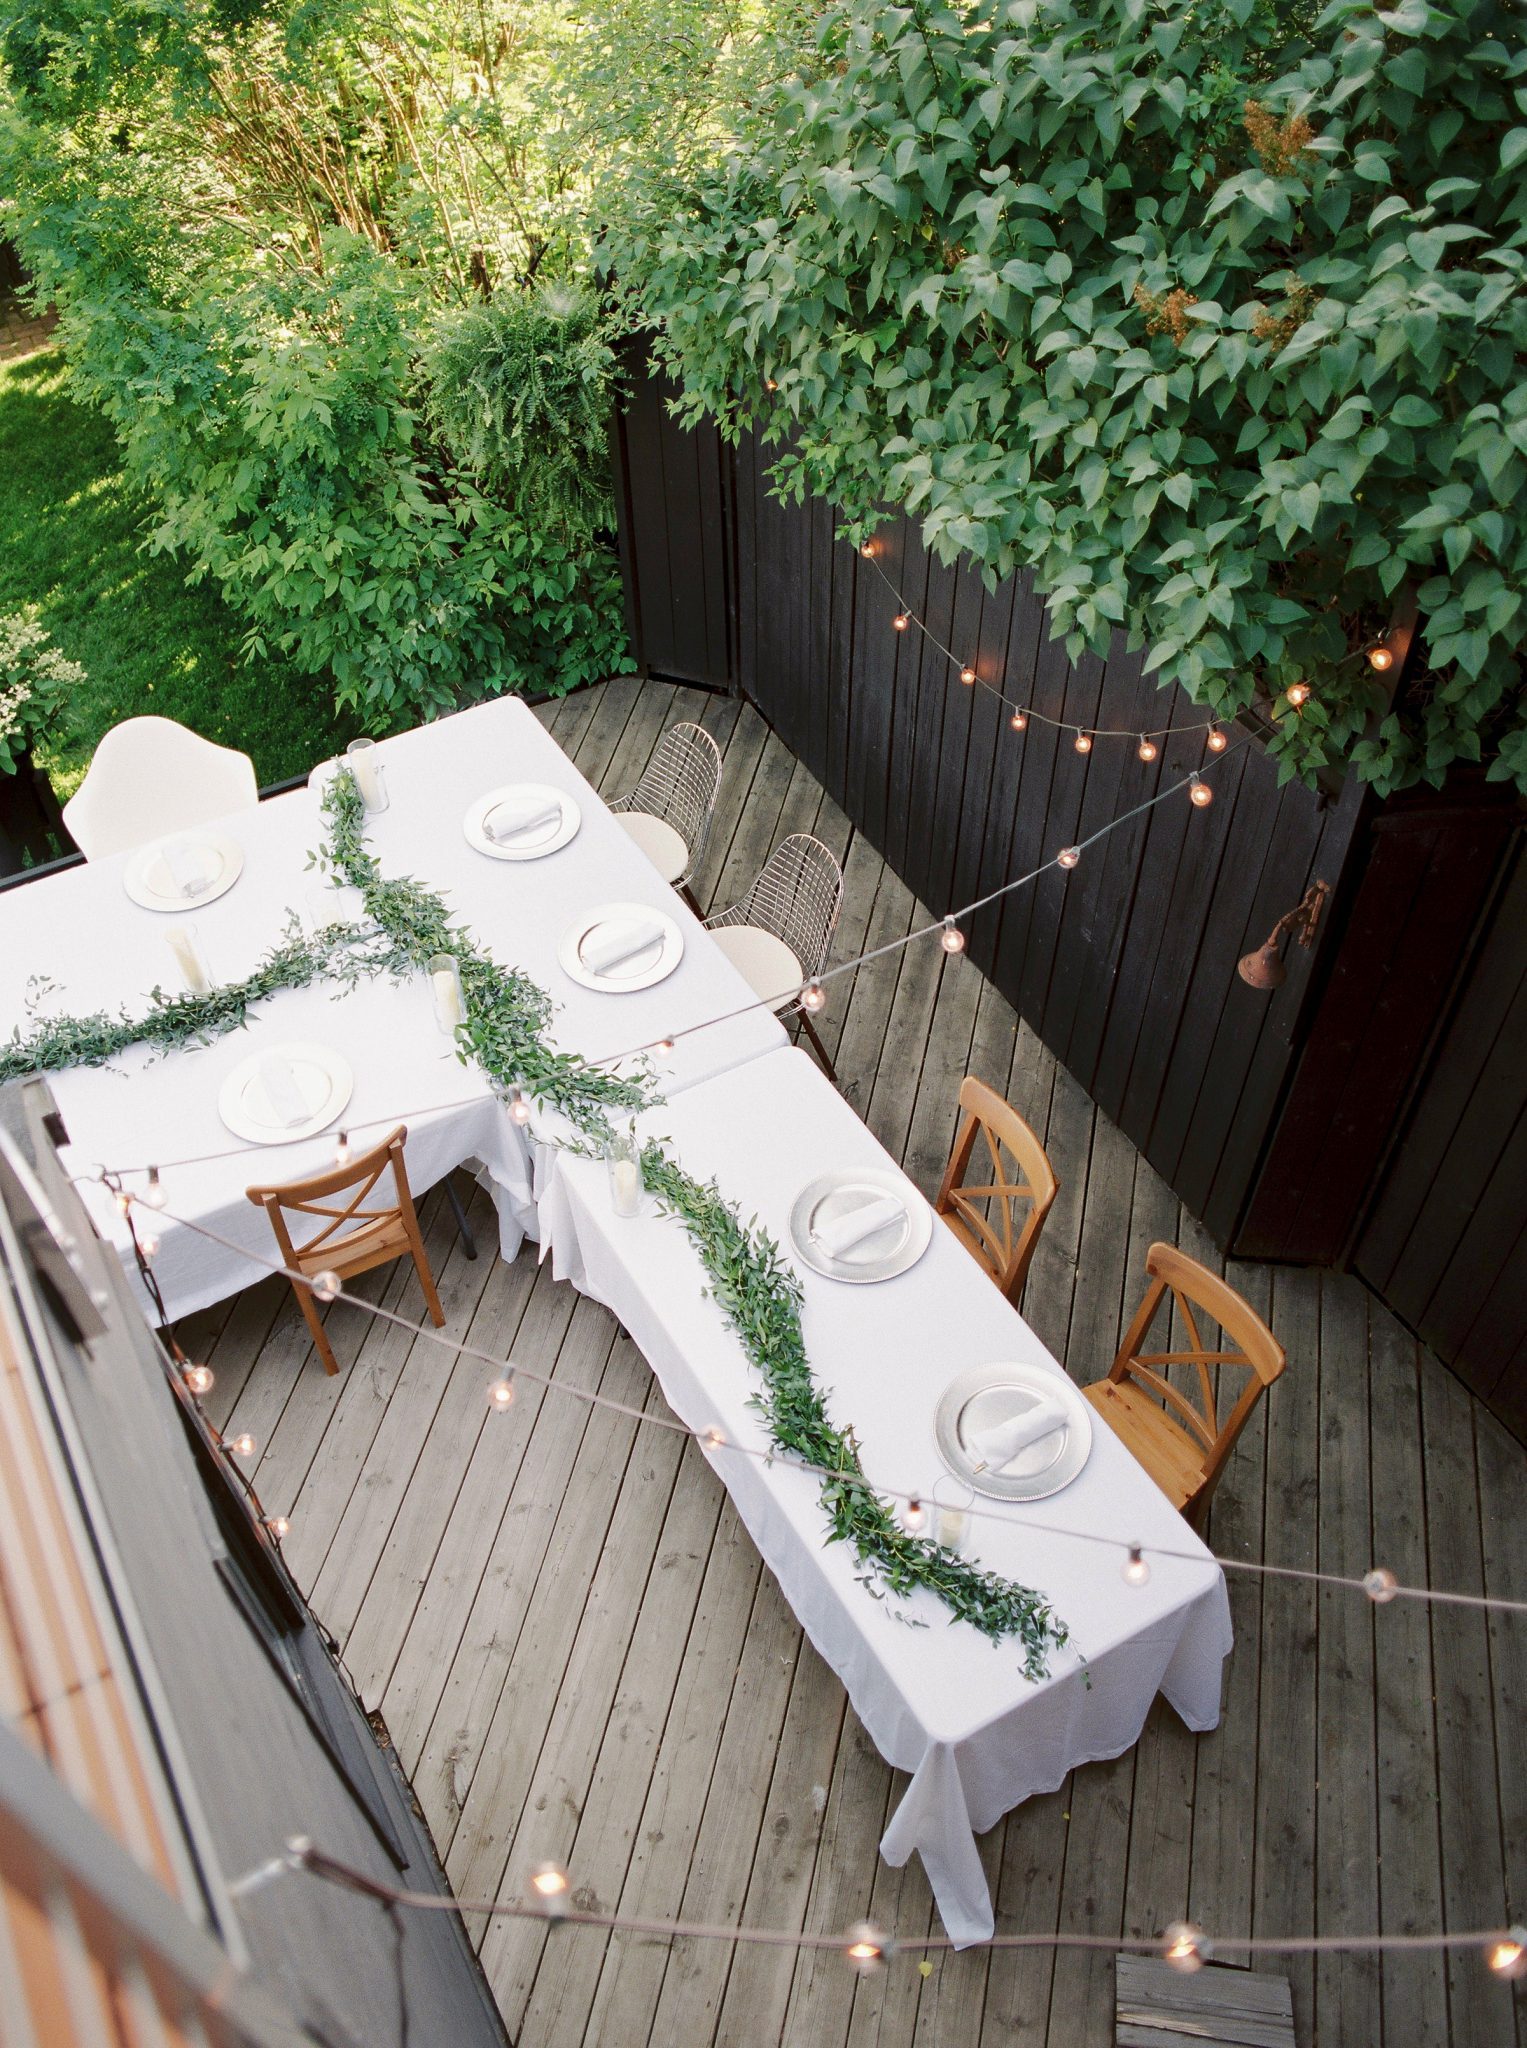 This Intimate Backyard Wedding with only 9 guests! - Edmonton Alberta Backyard Wedding 2020 Featured on Bronte Bride